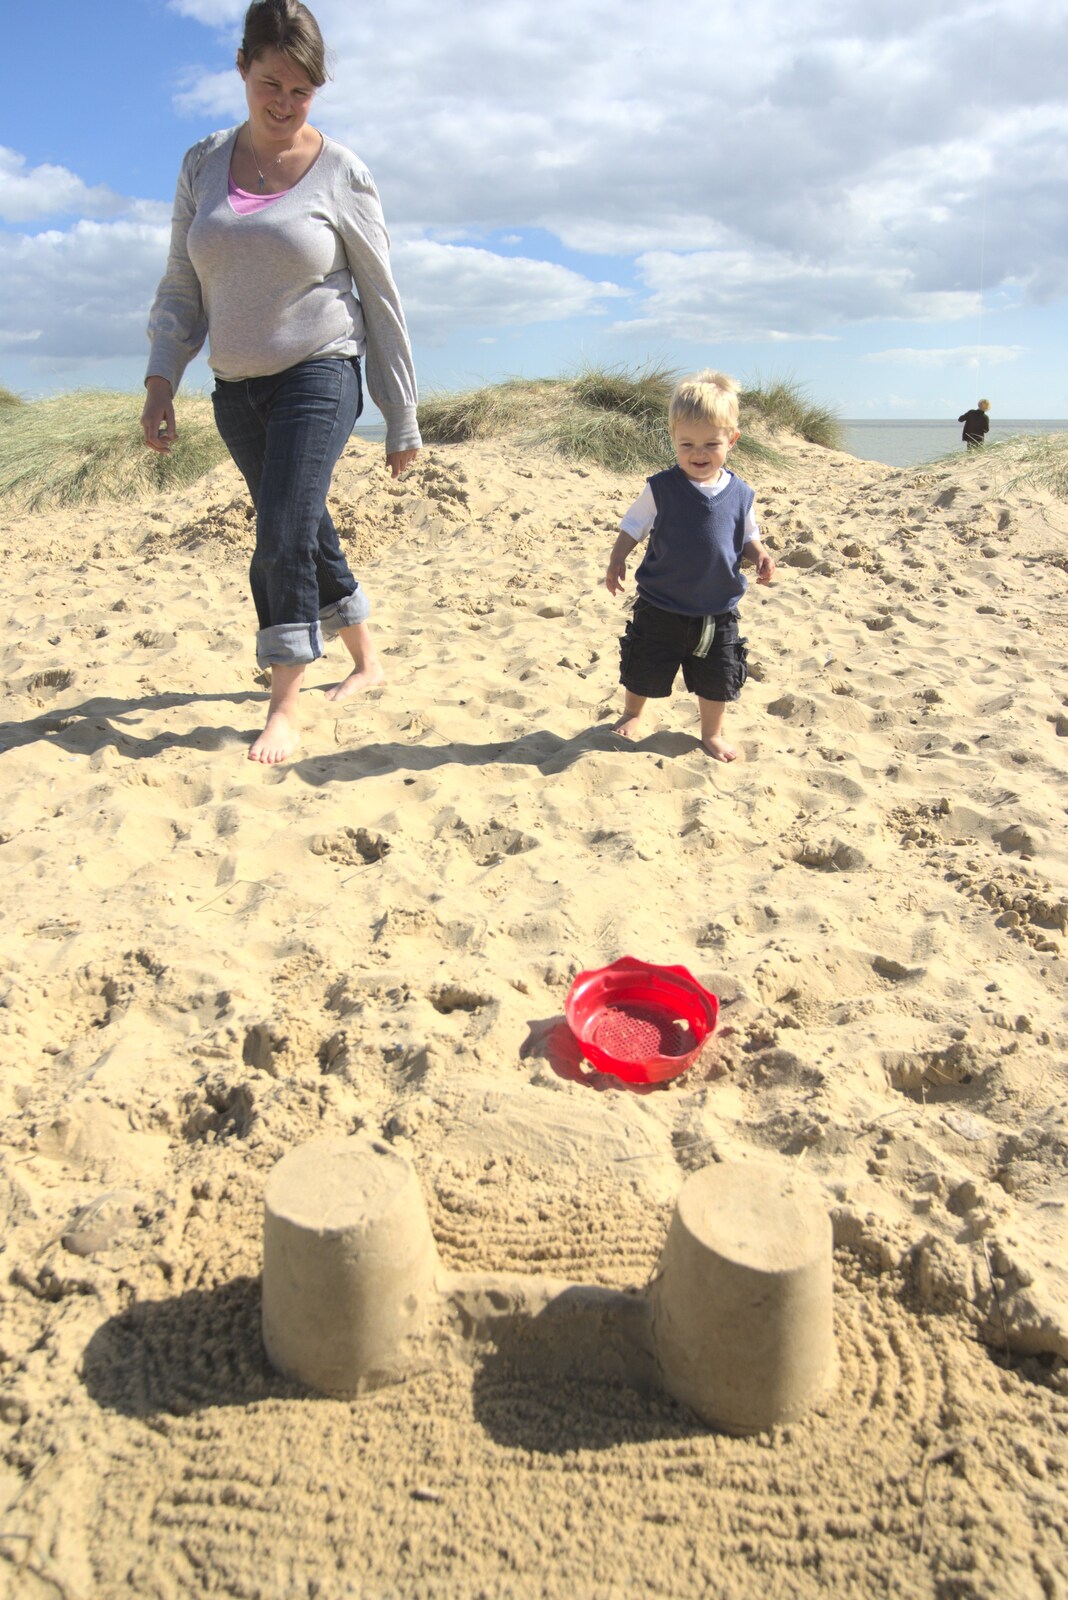 A Trip to Walberswick, Suffolk - 12th September 2010: Isobel, Fred and some sand castles